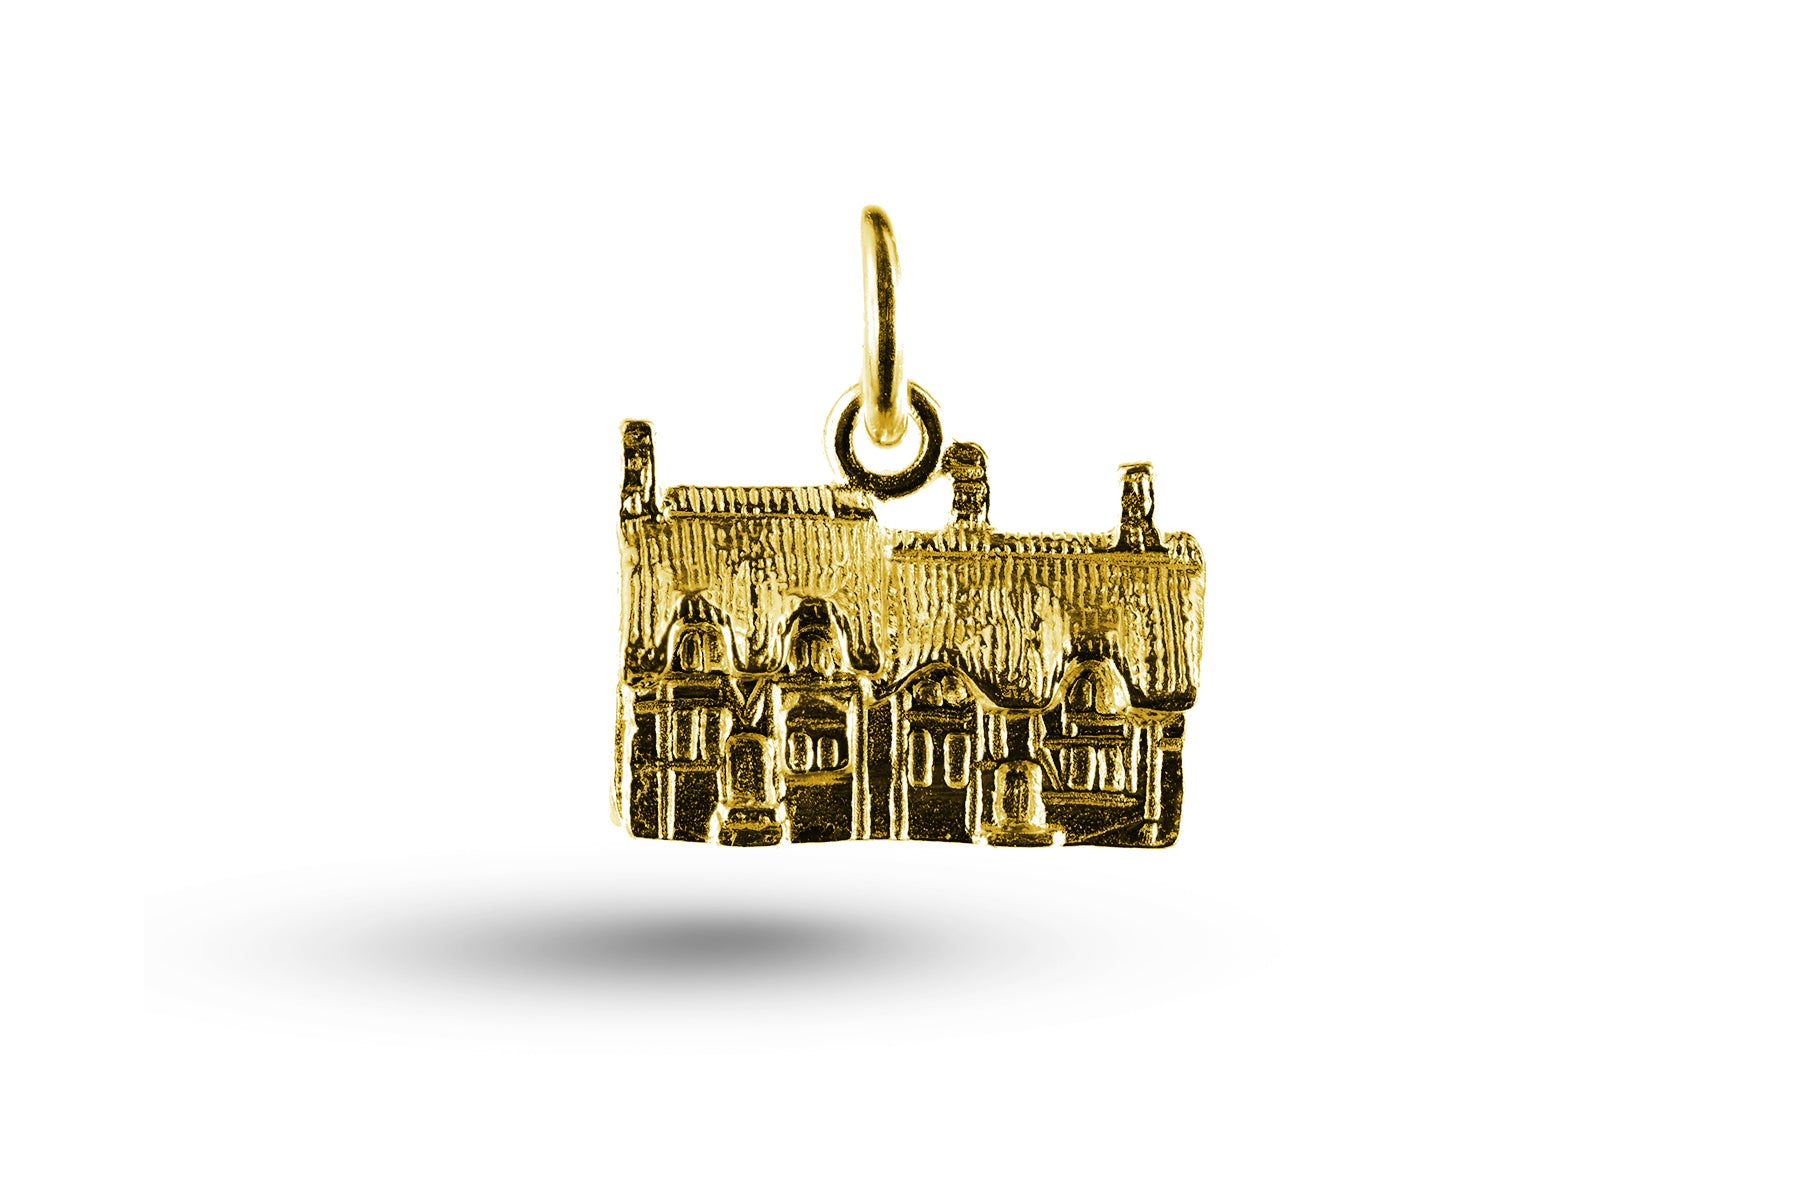 Luxury yellow gold Anne Hathaway cottage charm.